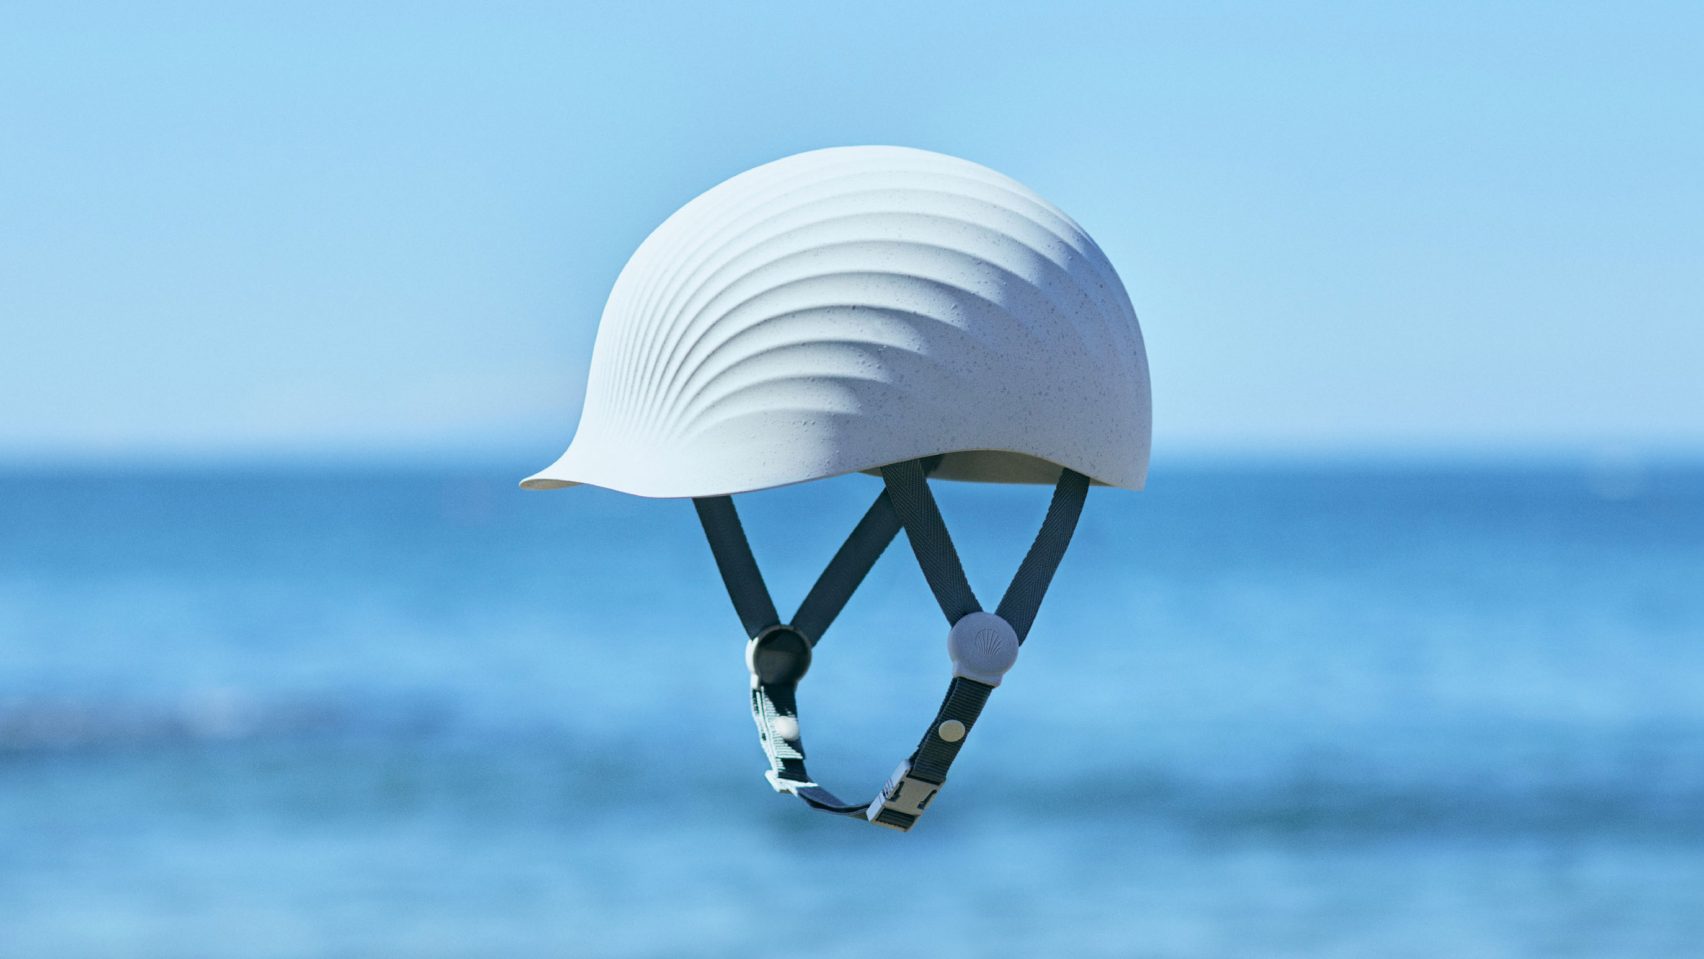 Sustainability news roundup Jan 2023 - Shellmet, helmet made out of seashell waste and plastic